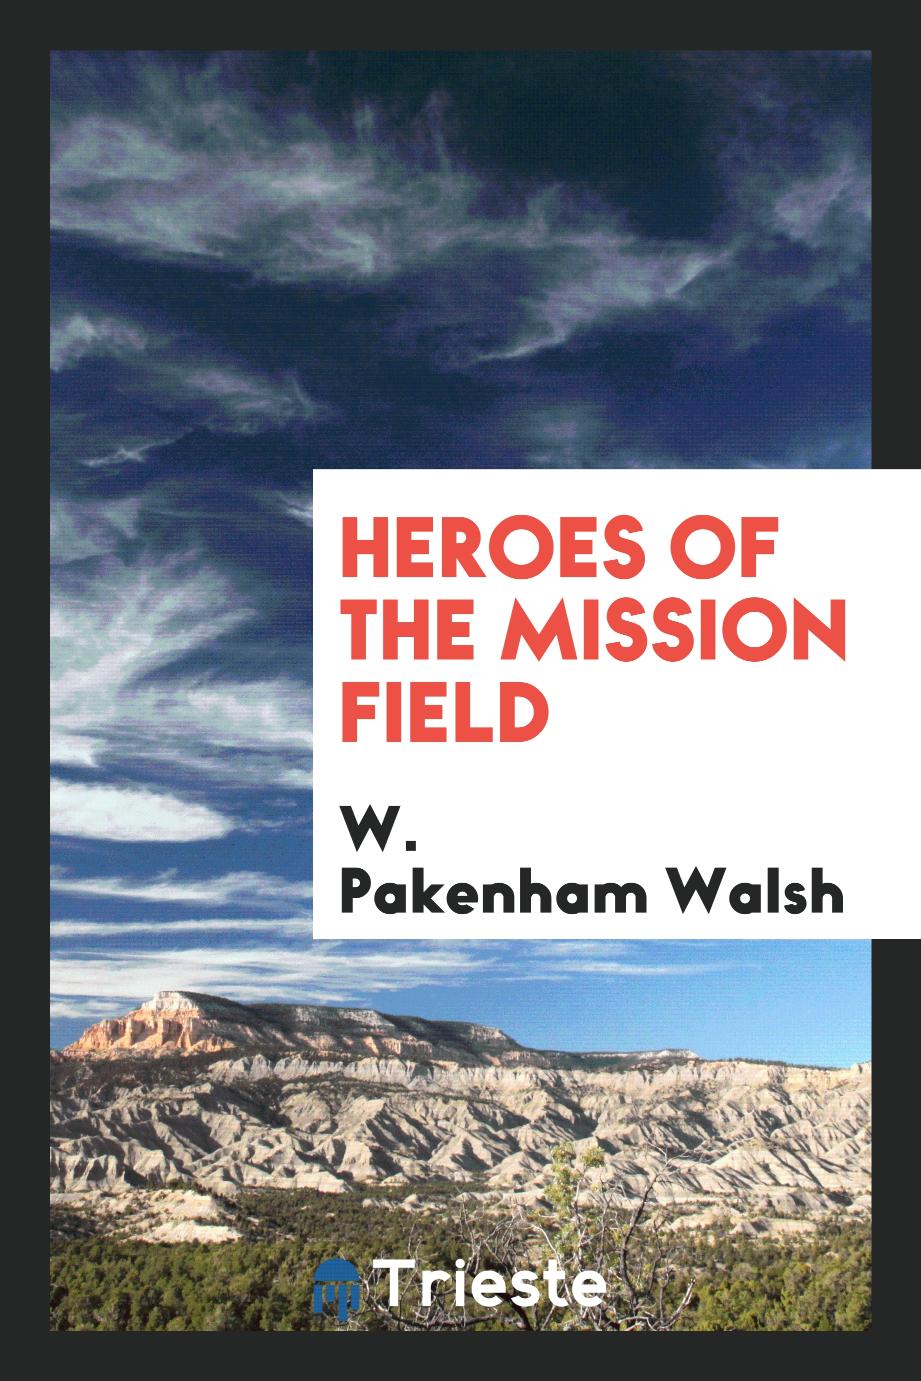 Heroes of the mission field